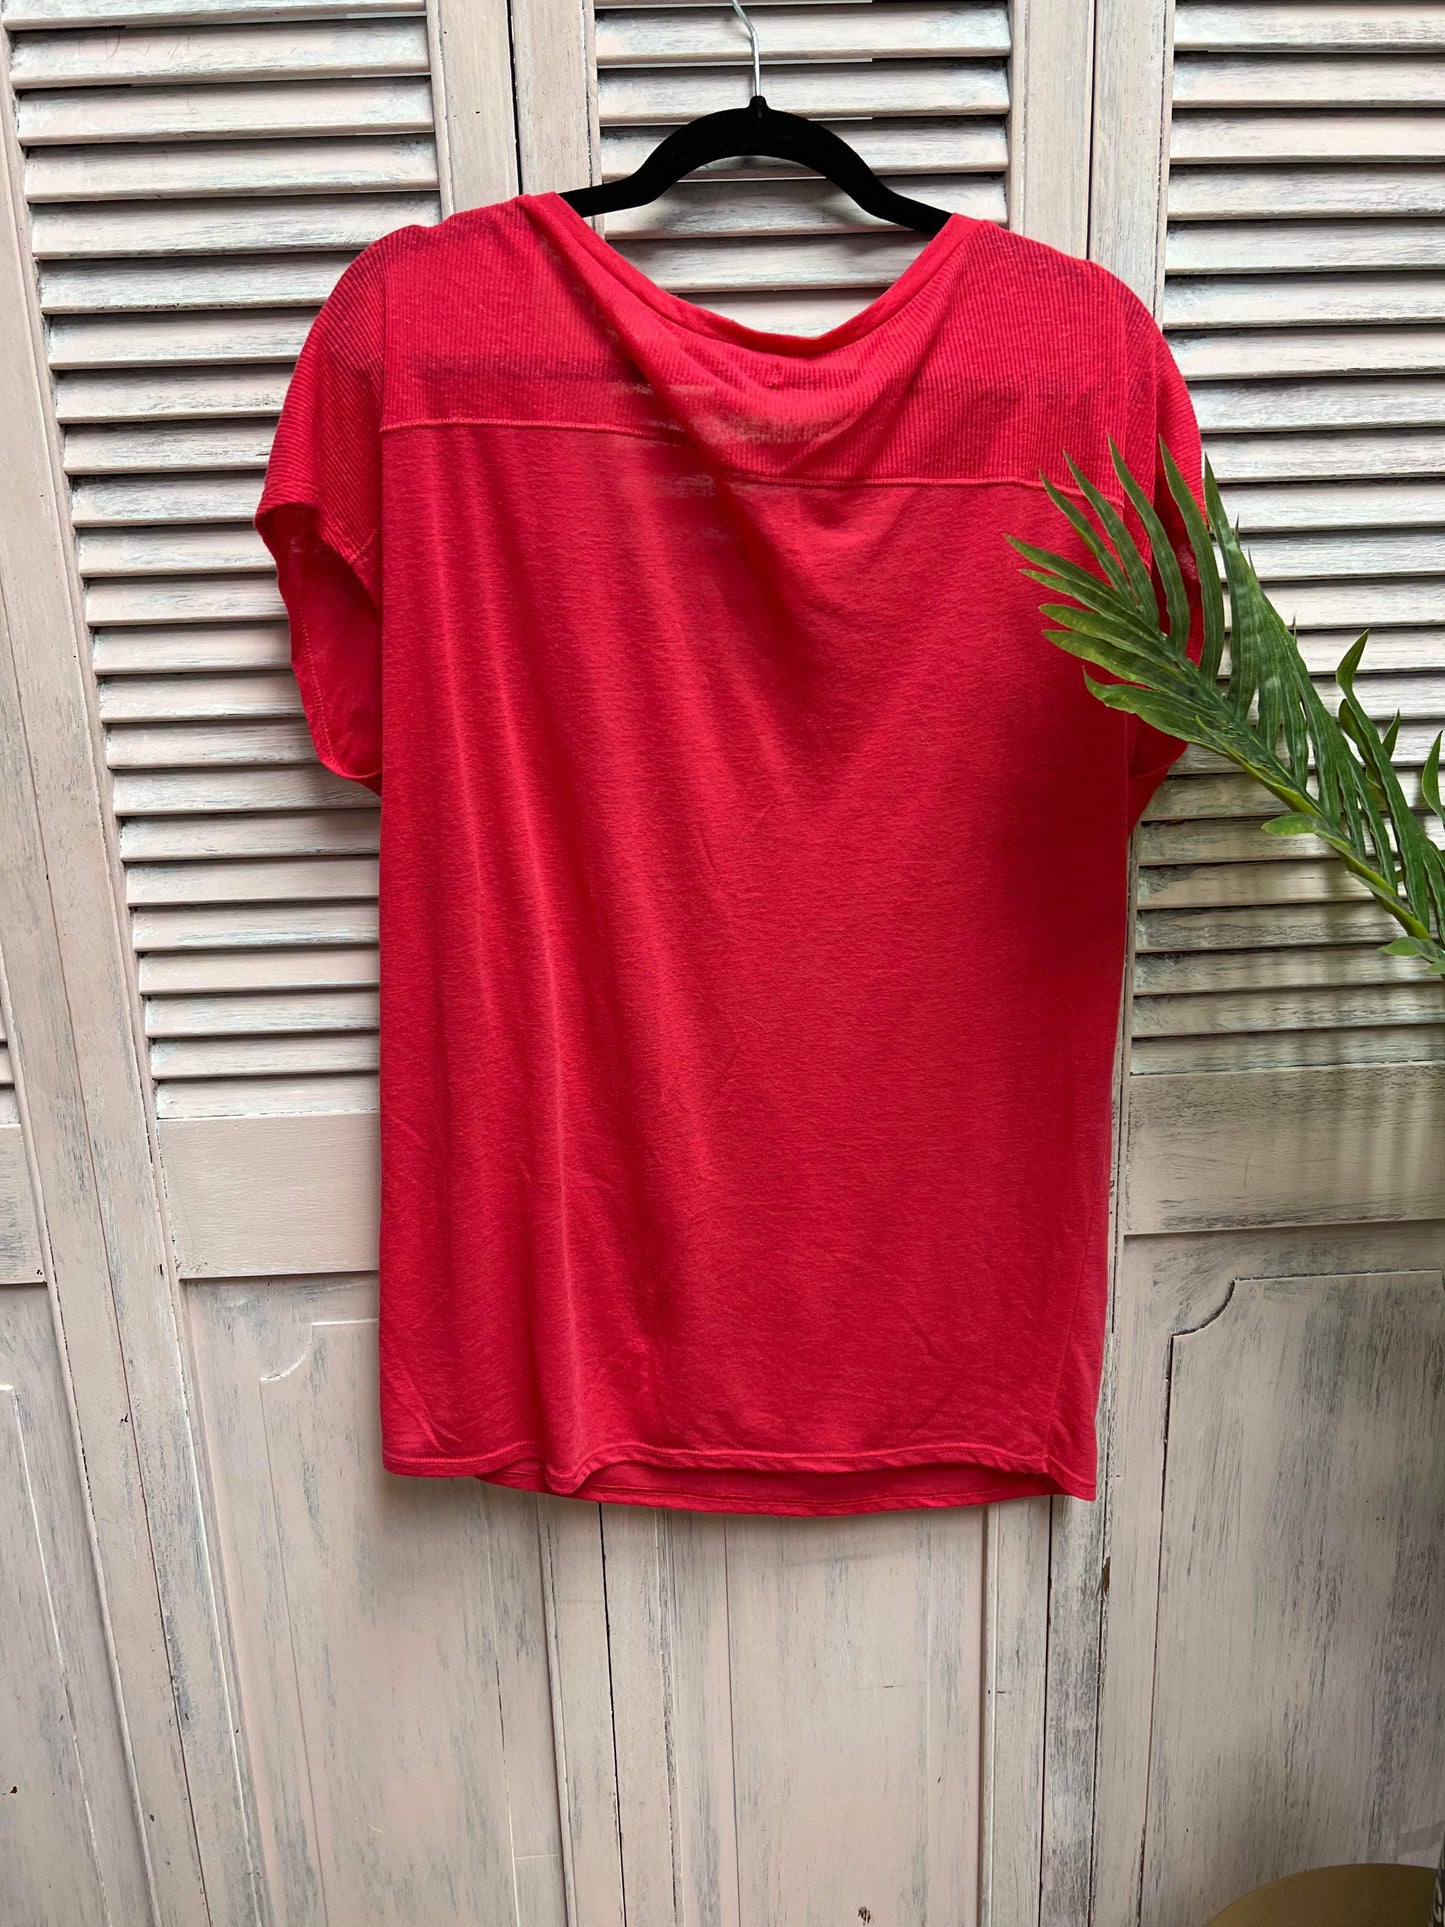 American Eagle Outfitters Short Sleeve Top